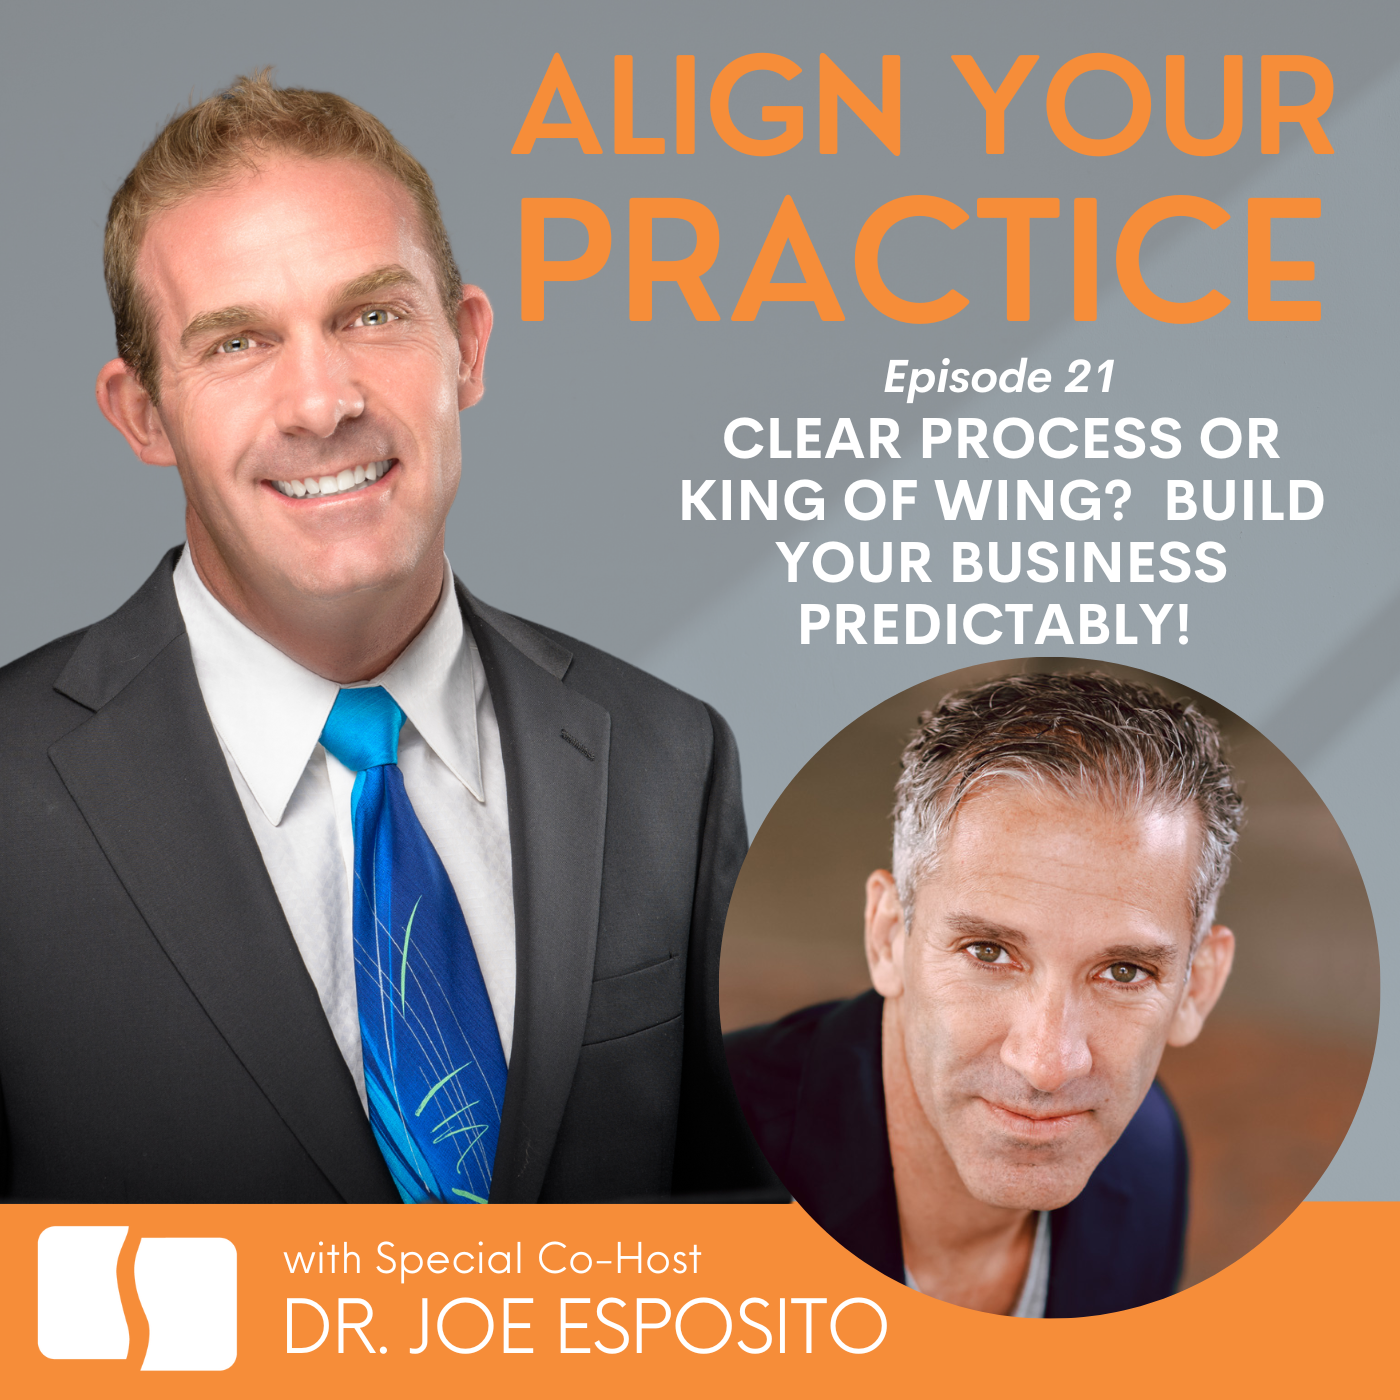 Clear Process or King of Wing? Build your Business Predictably!